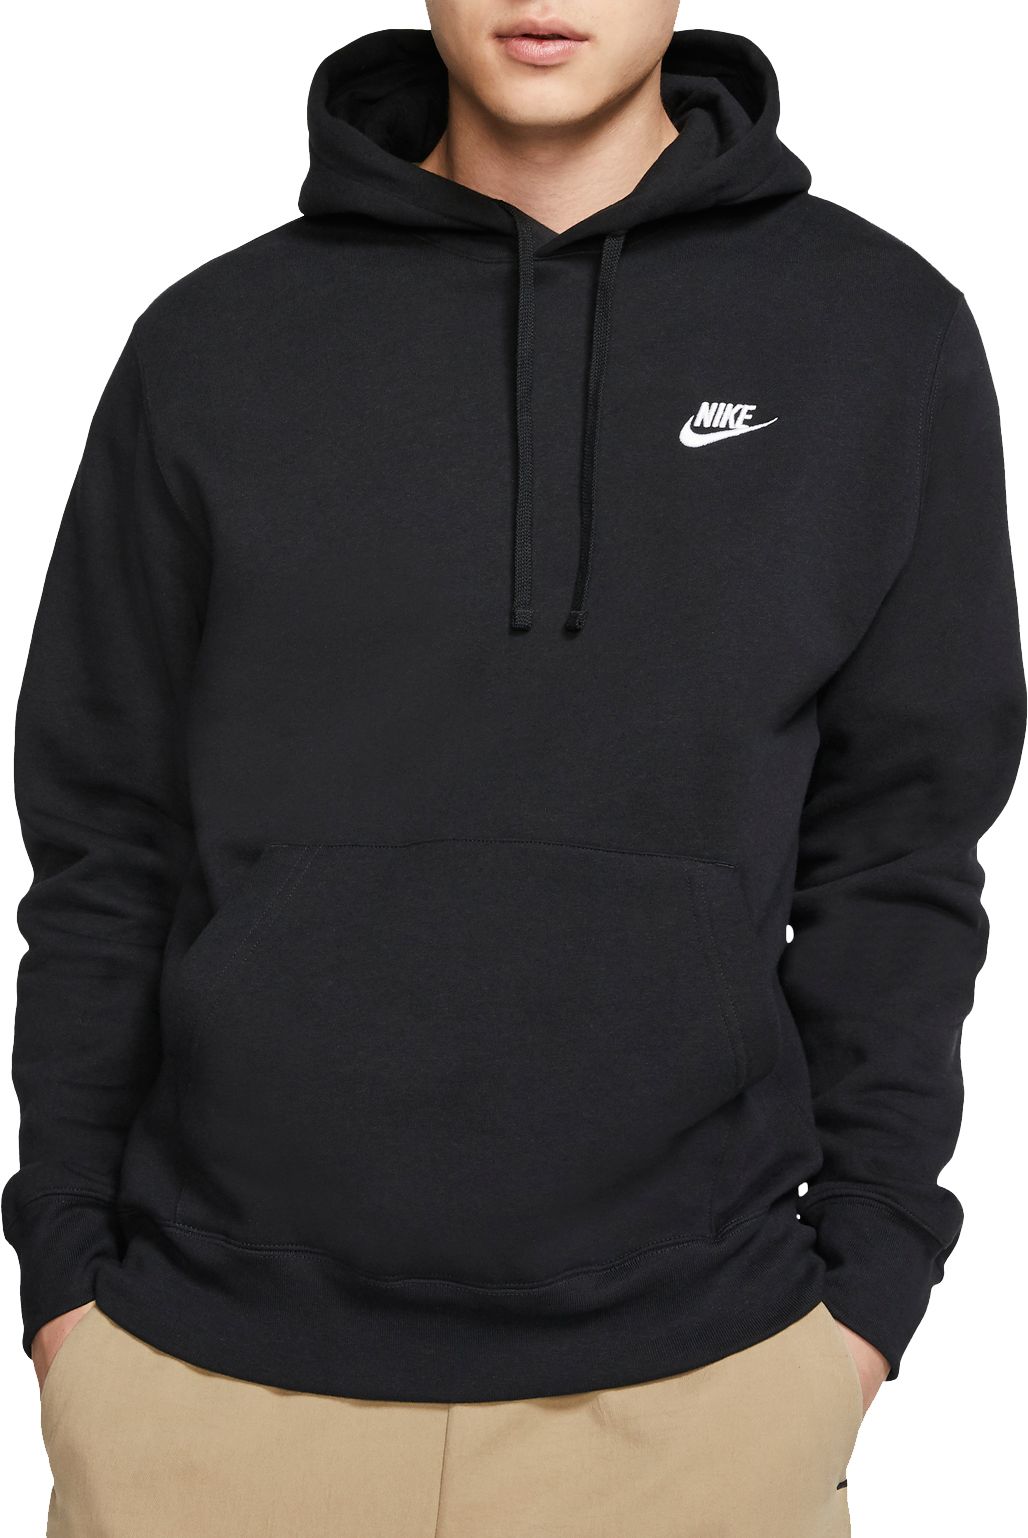 affordable nike clothes